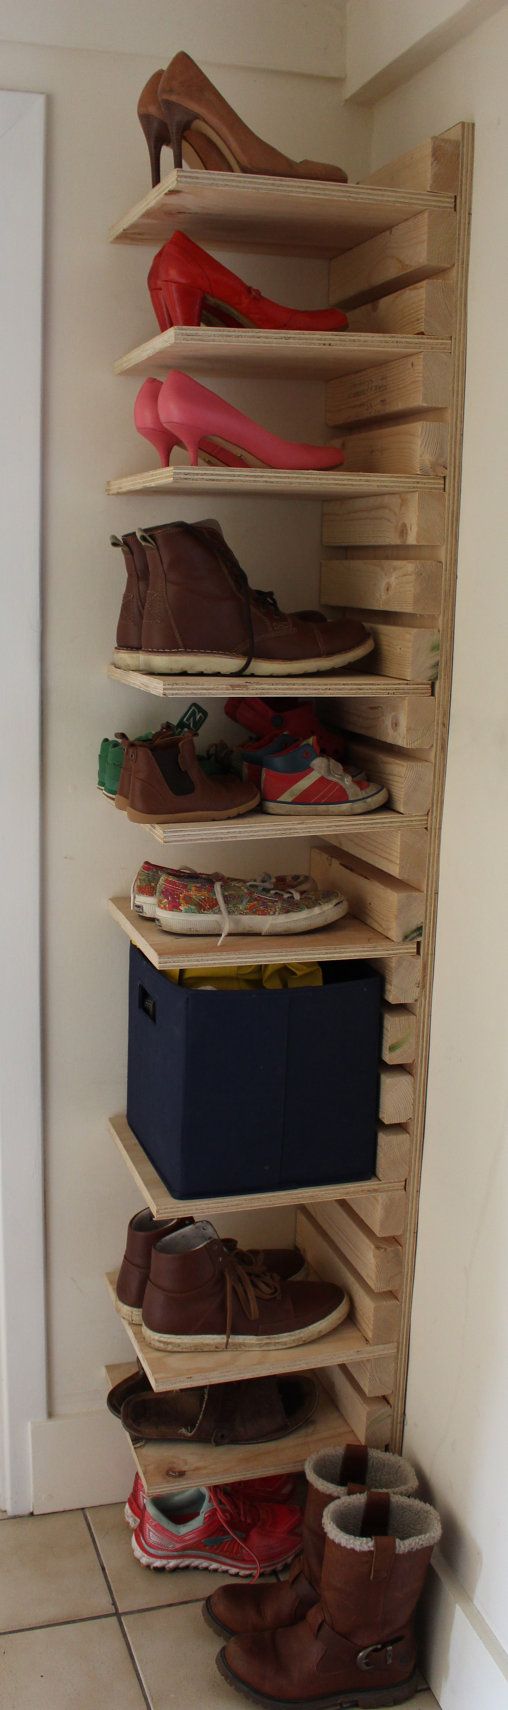 Etagere murale chaussure